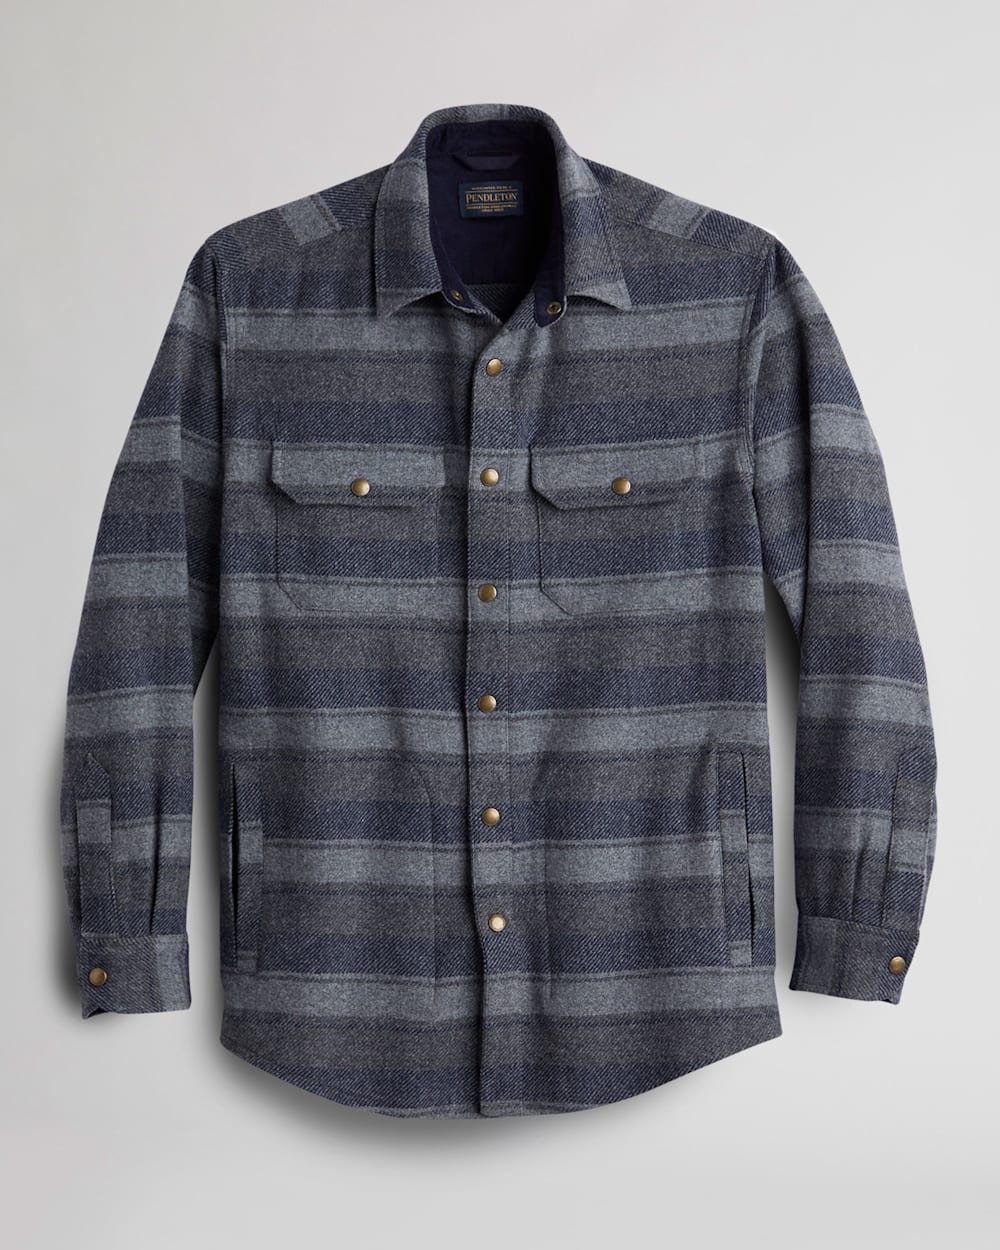 MEN'S STRIPE LAMBSWOOL TWILL SNAP-FRONT SHIRT IN GREY MIX/NAVY STRIPE image number 1